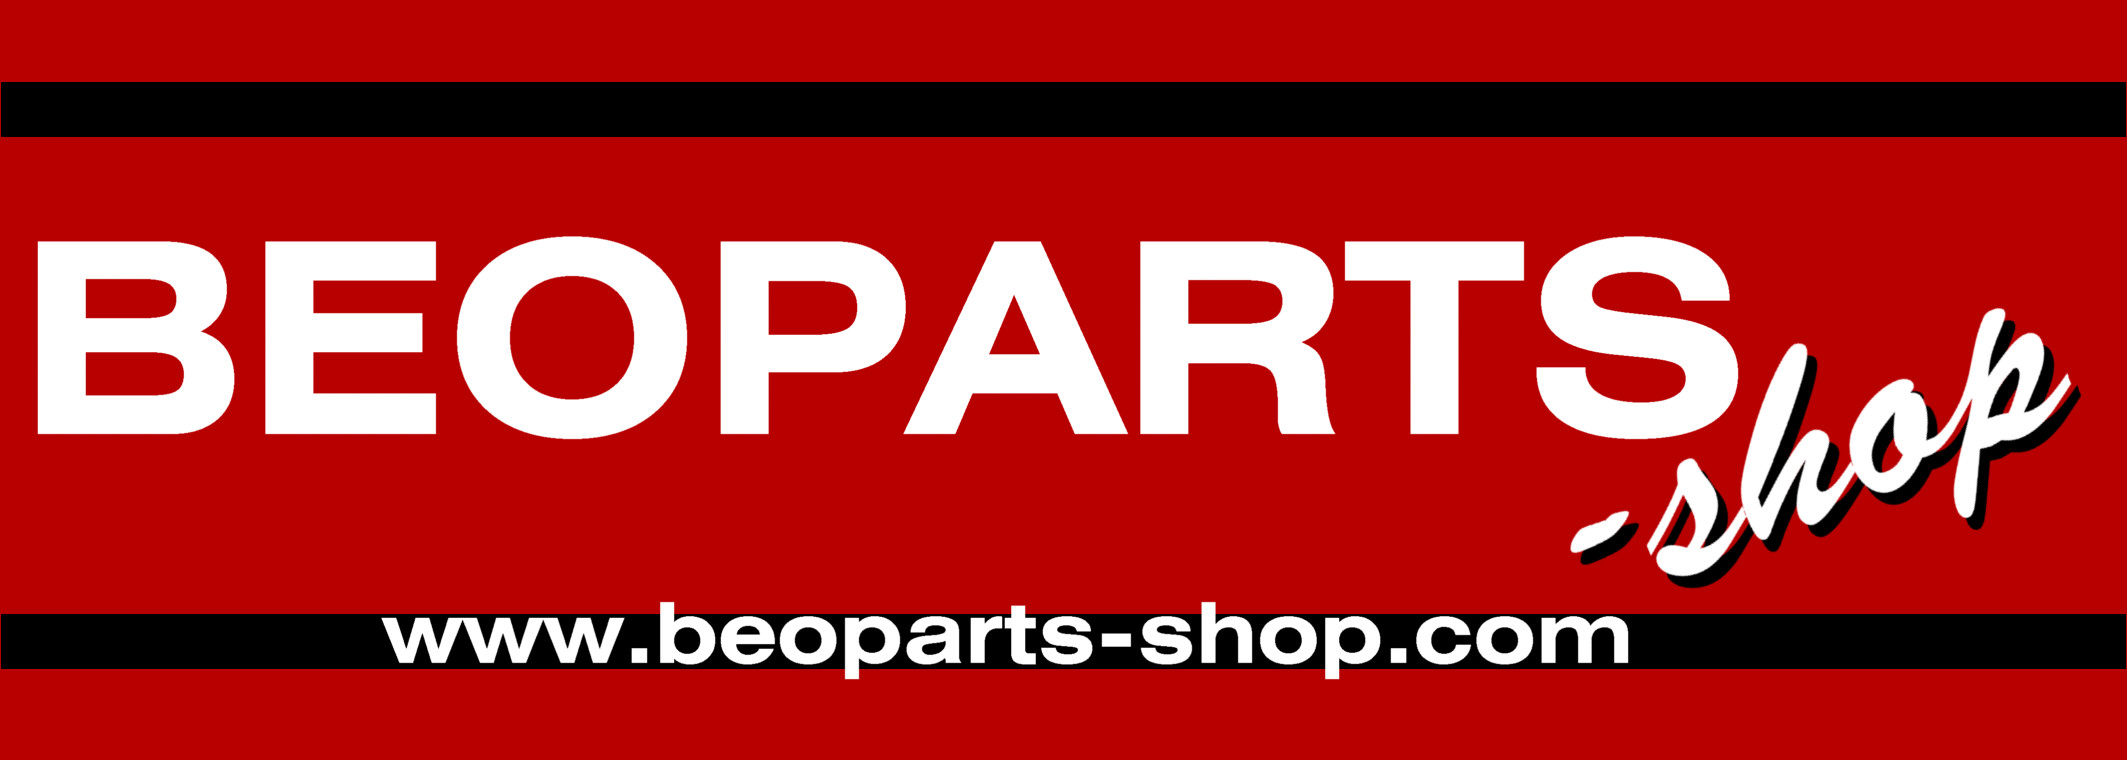 Beoparts-shop